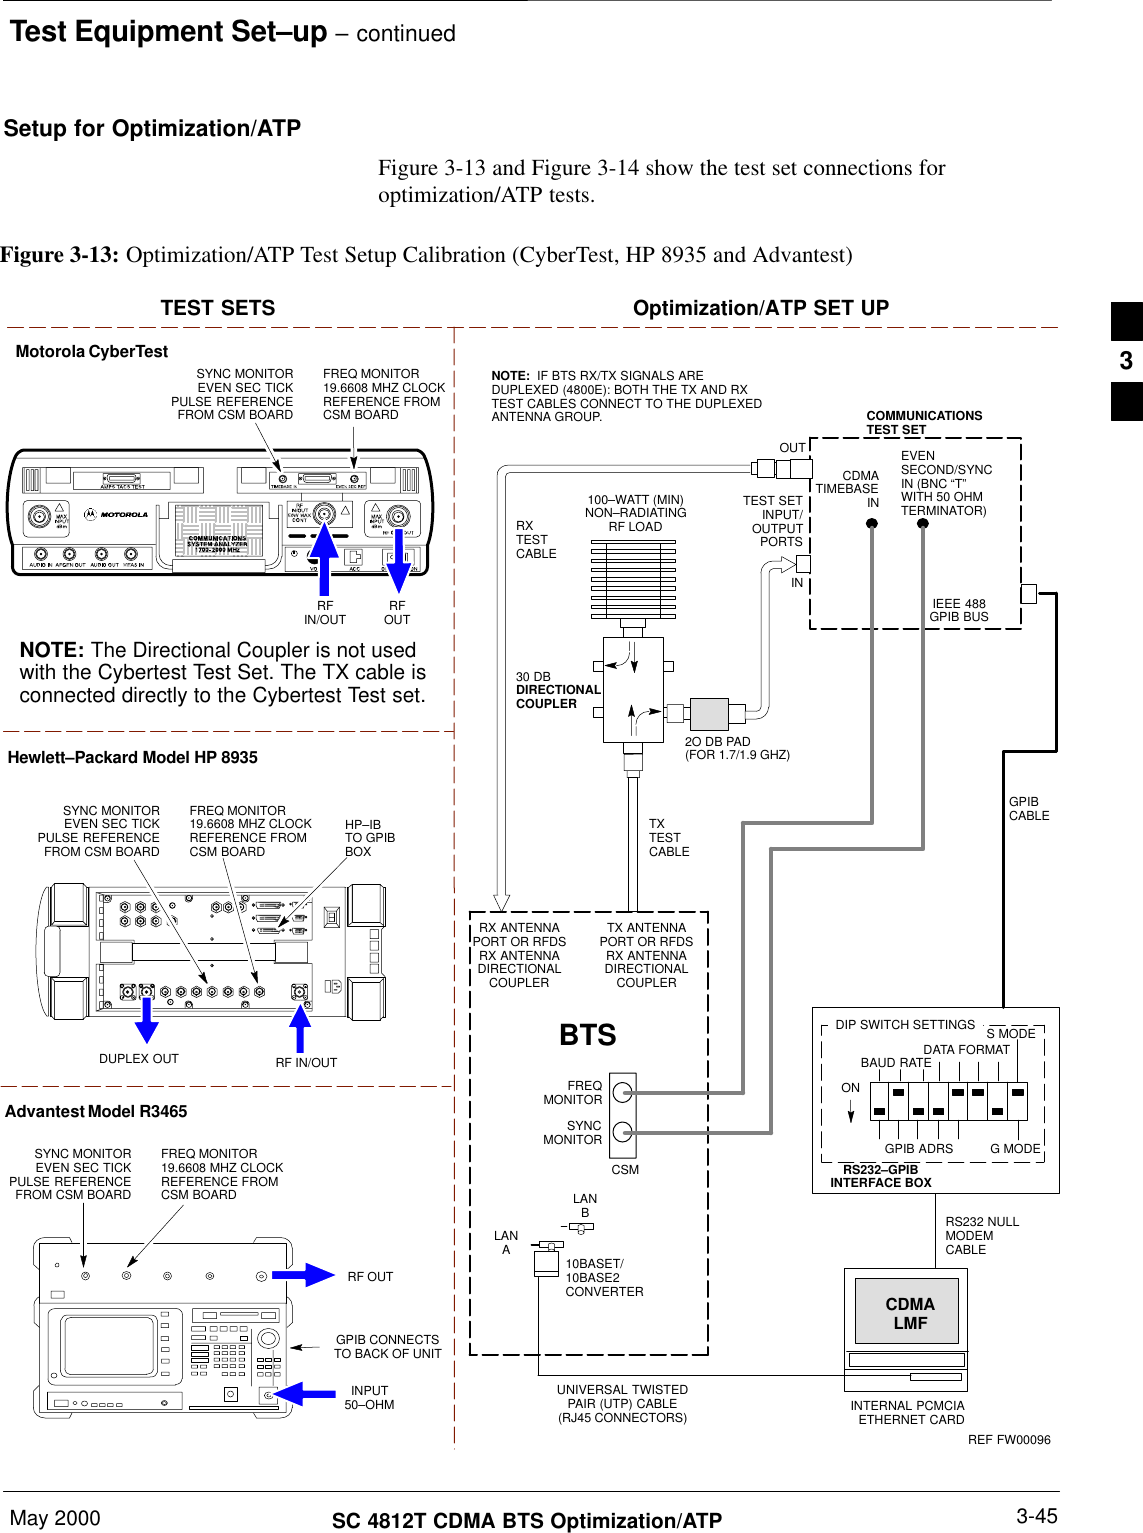 Test Equipment Set–up – continuedMay 2000 3-45SC 4812T CDMA BTS Optimization/ATPSetup for Optimization/ATPFigure 3-13 and Figure 3-14 show the test set connections foroptimization/ATP tests.Motorola CyberTestHewlett–Packard Model HP 8935DUPLEX OUTTEST SETS Optimization/ATP SET UPRFIN/OUTSYNC MONITOREVEN SEC TICKPULSE REFERENCEFROM CSM BOARDFREQ MONITOR19.6608 MHZ CLOCKREFERENCE FROMCSM BOARDRF IN/OUTHP–IBTO GPIBBOXAdvantest Model R3465INPUT50–OHMGPIB CONNECTSTO BACK OF UNITNOTE: The Directional Coupler is not usedwith the Cybertest Test Set. The TX cable isconnected directly to the Cybertest Test set.RF OUTRX ANTENNAPORT OR RFDSRX ANTENNADIRECTIONALCOUPLERTX ANTENNAPORT OR RFDSRX ANTENNADIRECTIONALCOUPLERRS232–GPIBINTERFACE BOXINTERNAL PCMCIAETHERNET CARDGPIBCABLEUNIVERSAL TWISTEDPAIR (UTP) CABLE(RJ45 CONNECTORS)RS232 NULLMODEMCABLES MODEDATA FORMATBAUD RATEGPIB ADRS G MODEONBTSTXTESTCABLECDMALMFDIP SWITCH SETTINGS10BASET/10BASE2CONVERTERLANBLANARXTESTCABLECOMMUNICATIONSTEST SETIEEE 488GPIB BUSINTEST SETINPUT/OUTPUTPORTSOUTNOTE:  IF BTS RX/TX SIGNALS AREDUPLEXED (4800E): BOTH THE TX AND RXTEST CABLES CONNECT TO THE DUPLEXEDANTENNA GROUP.100–WATT (MIN)NON–RADIATINGRF LOAD2O DB PAD(FOR 1.7/1.9 GHZ)30 DBDIRECTIONALCOUPLEREVENSECOND/SYNCIN (BNC “T”WITH 50 OHMTERMINATOR)CDMATIMEBASE INFREQMONITORSYNCMONITORCSMREF FW00096Figure 3-13: Optimization/ATP Test Setup Calibration (CyberTest, HP 8935 and Advantest)SYNC MONITOREVEN SEC TICKPULSE REFERENCEFROM CSM BOARDFREQ MONITOR19.6608 MHZ CLOCKREFERENCE FROMCSM BOARDSYNC MONITOREVEN SEC TICKPULSE REFERENCEFROM CSM BOARDFREQ MONITOR19.6608 MHZ CLOCKREFERENCE FROMCSM BOARDRFOUT3